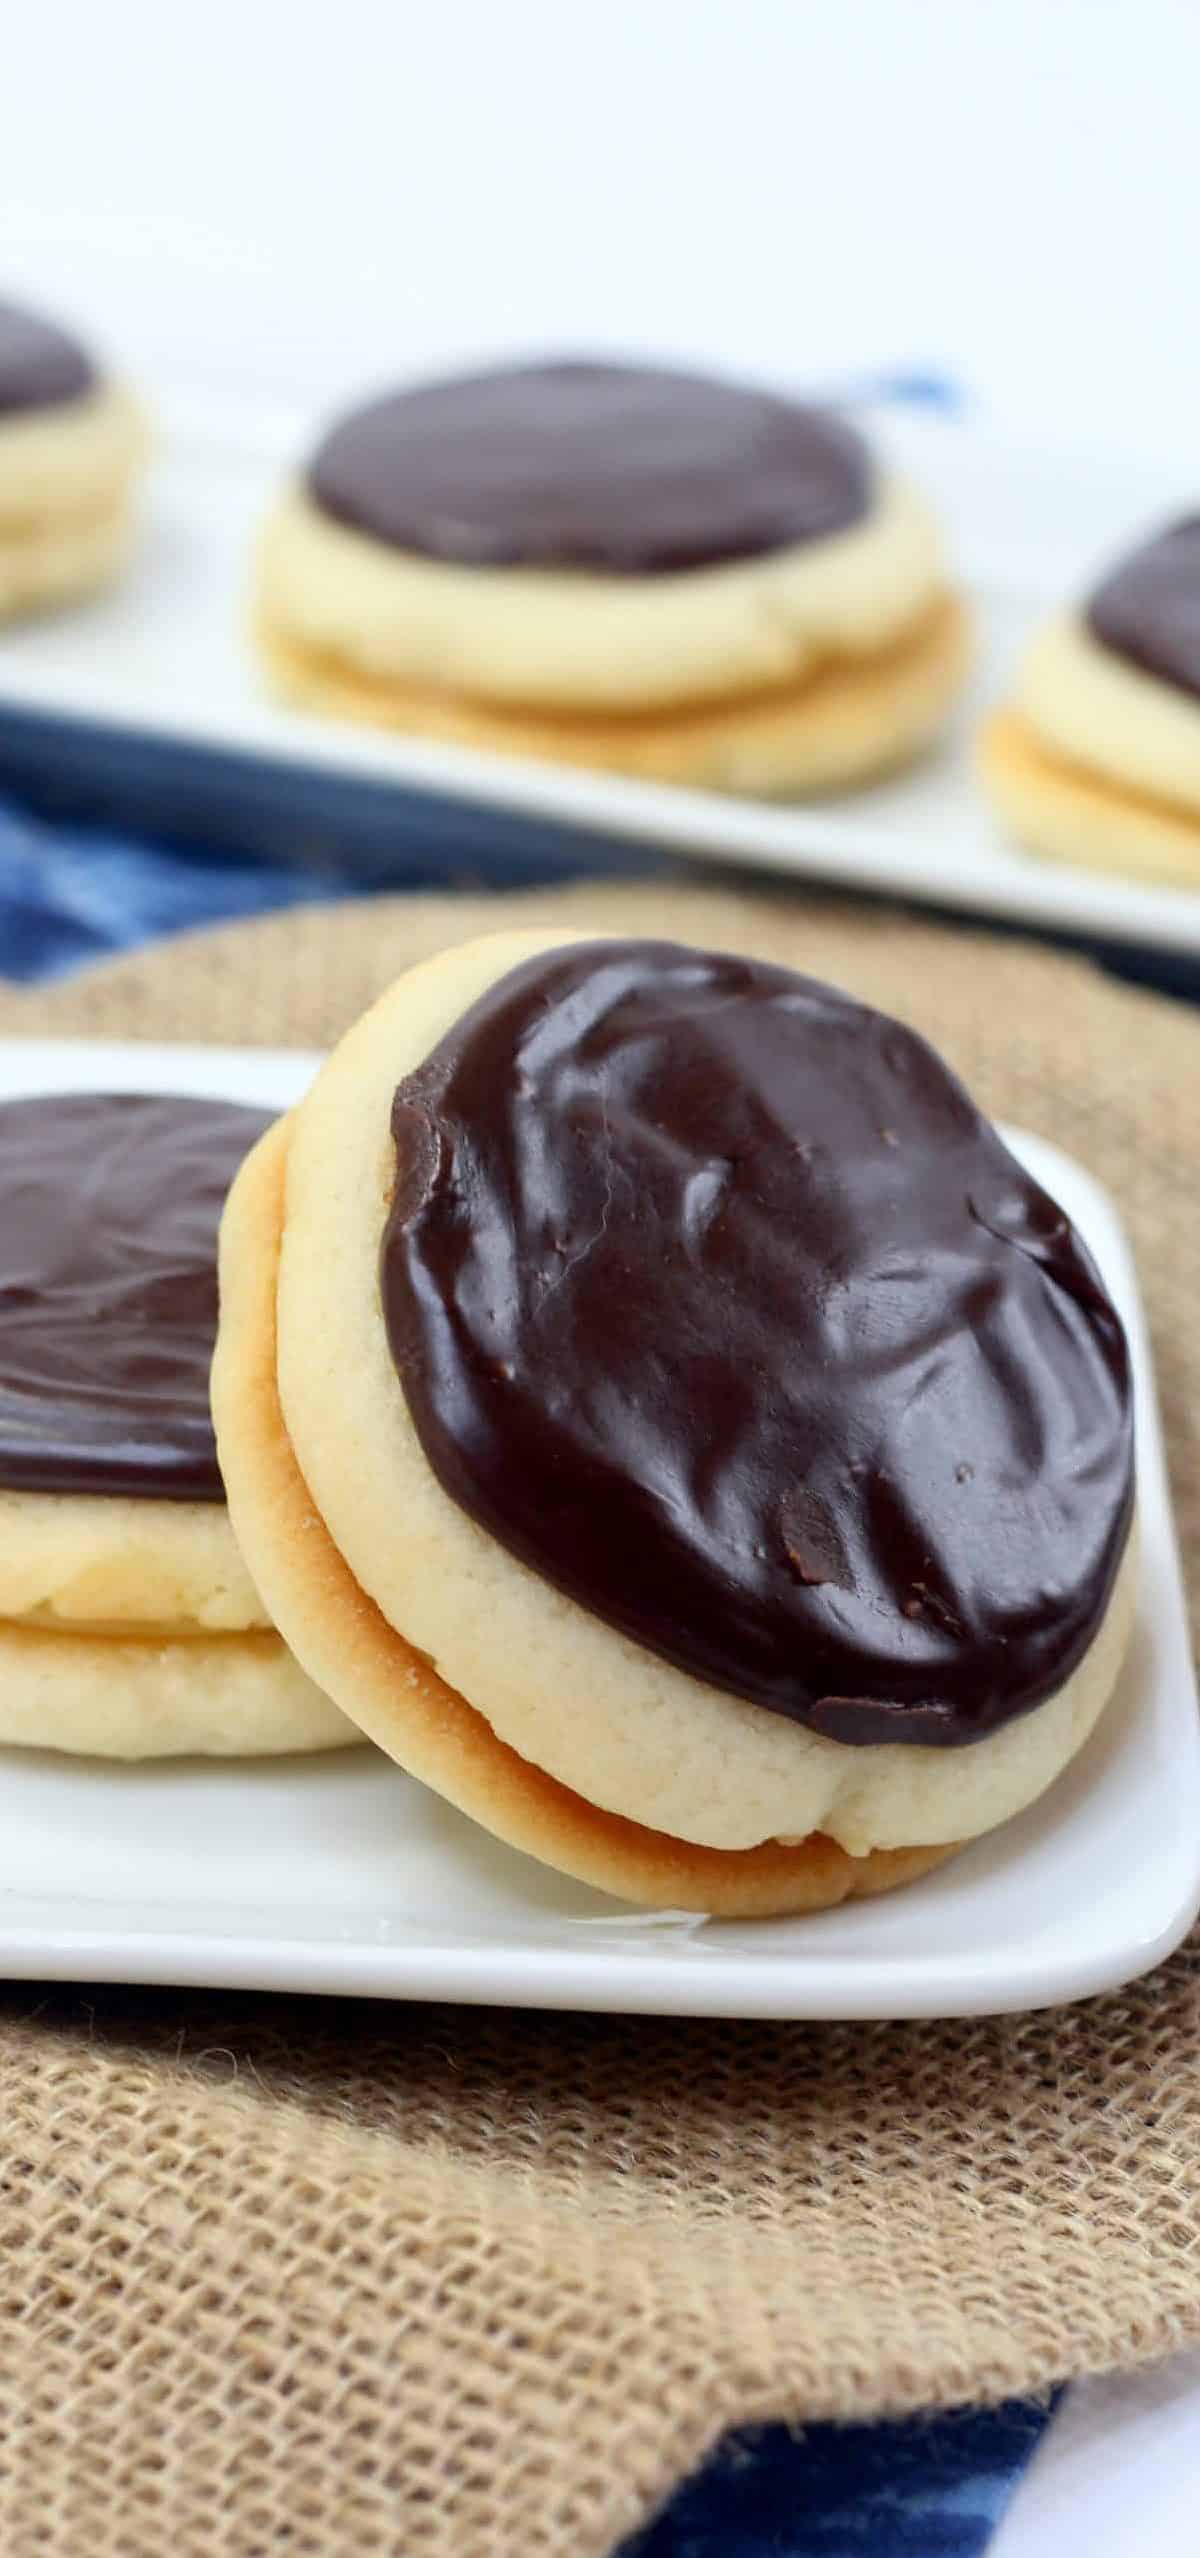  Welcome to cookie heaven with Boston cream deliciousness.